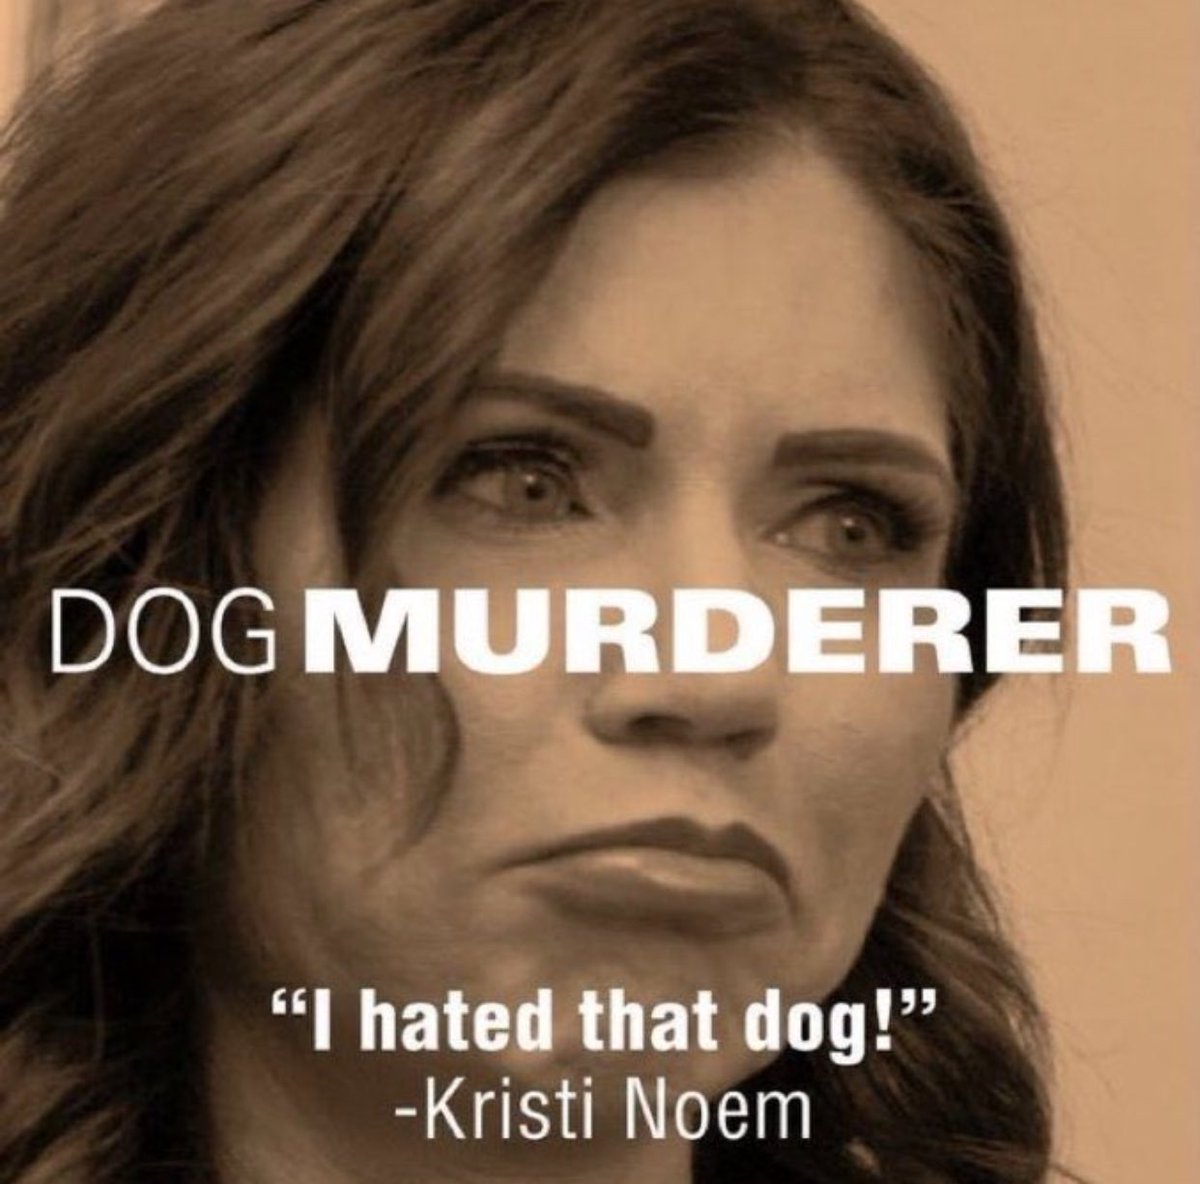 @KristiNoem Ah, so now the reason you murdered Cricket, a 14-month old not yet adult dog, was because she was a danger to the child who came home and asked where she was, attacked people and livestock.  Sure Jan.

#JusticeForCricket